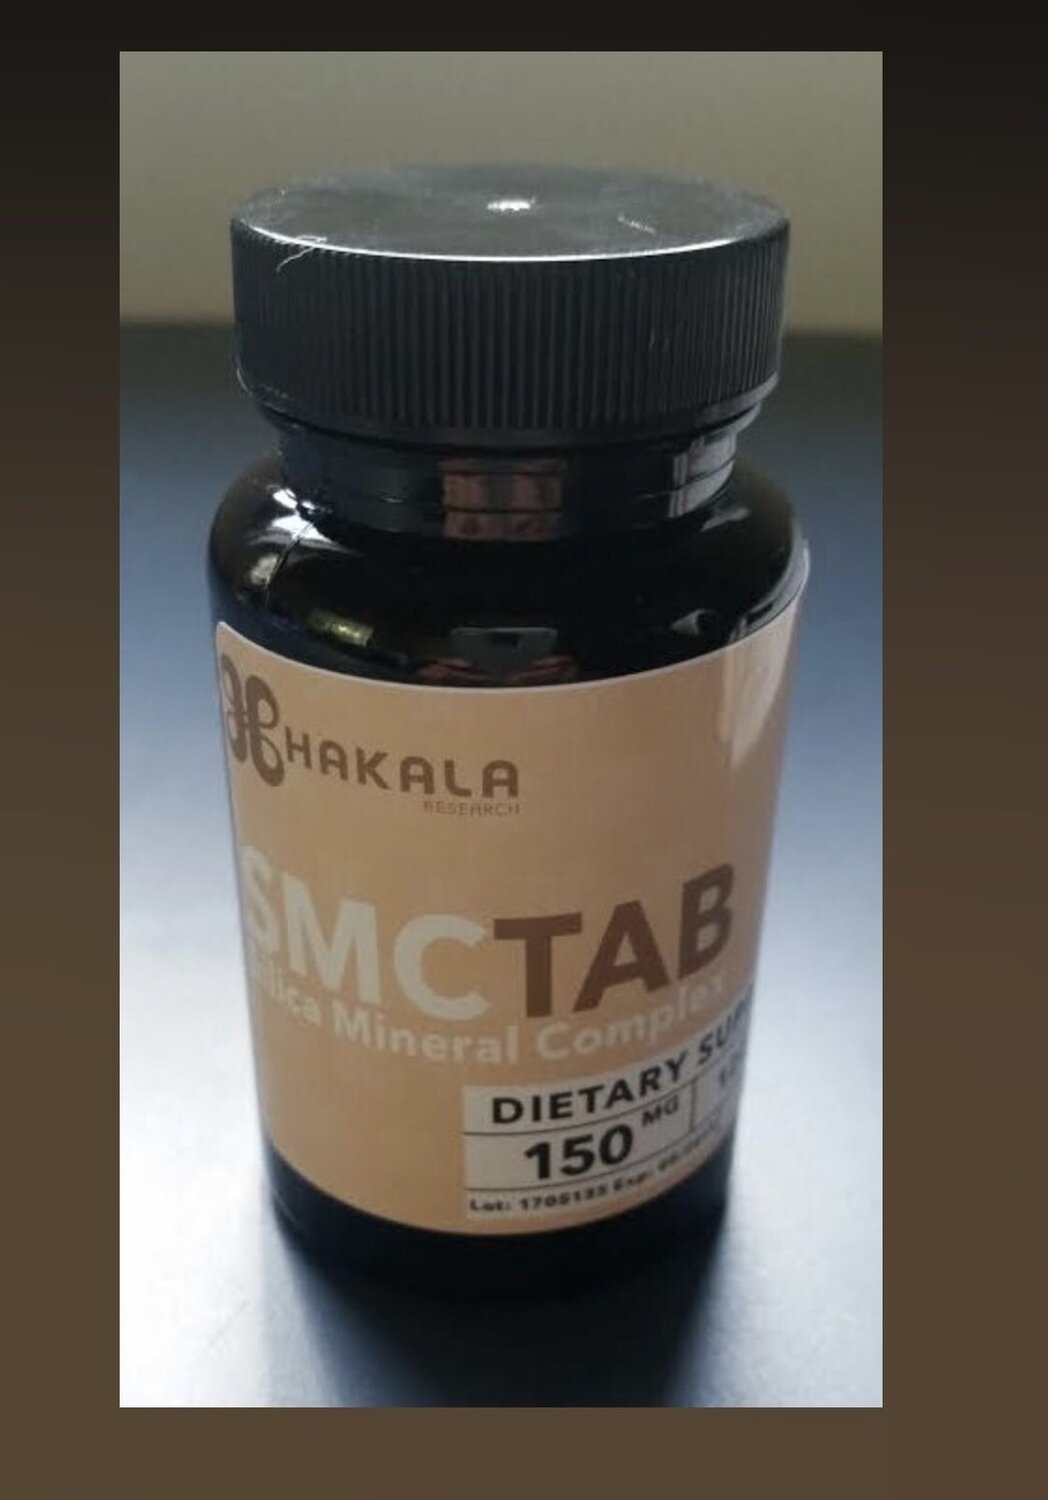 SMCTab-Silica Mineral Complex 150mg-90 Tablets